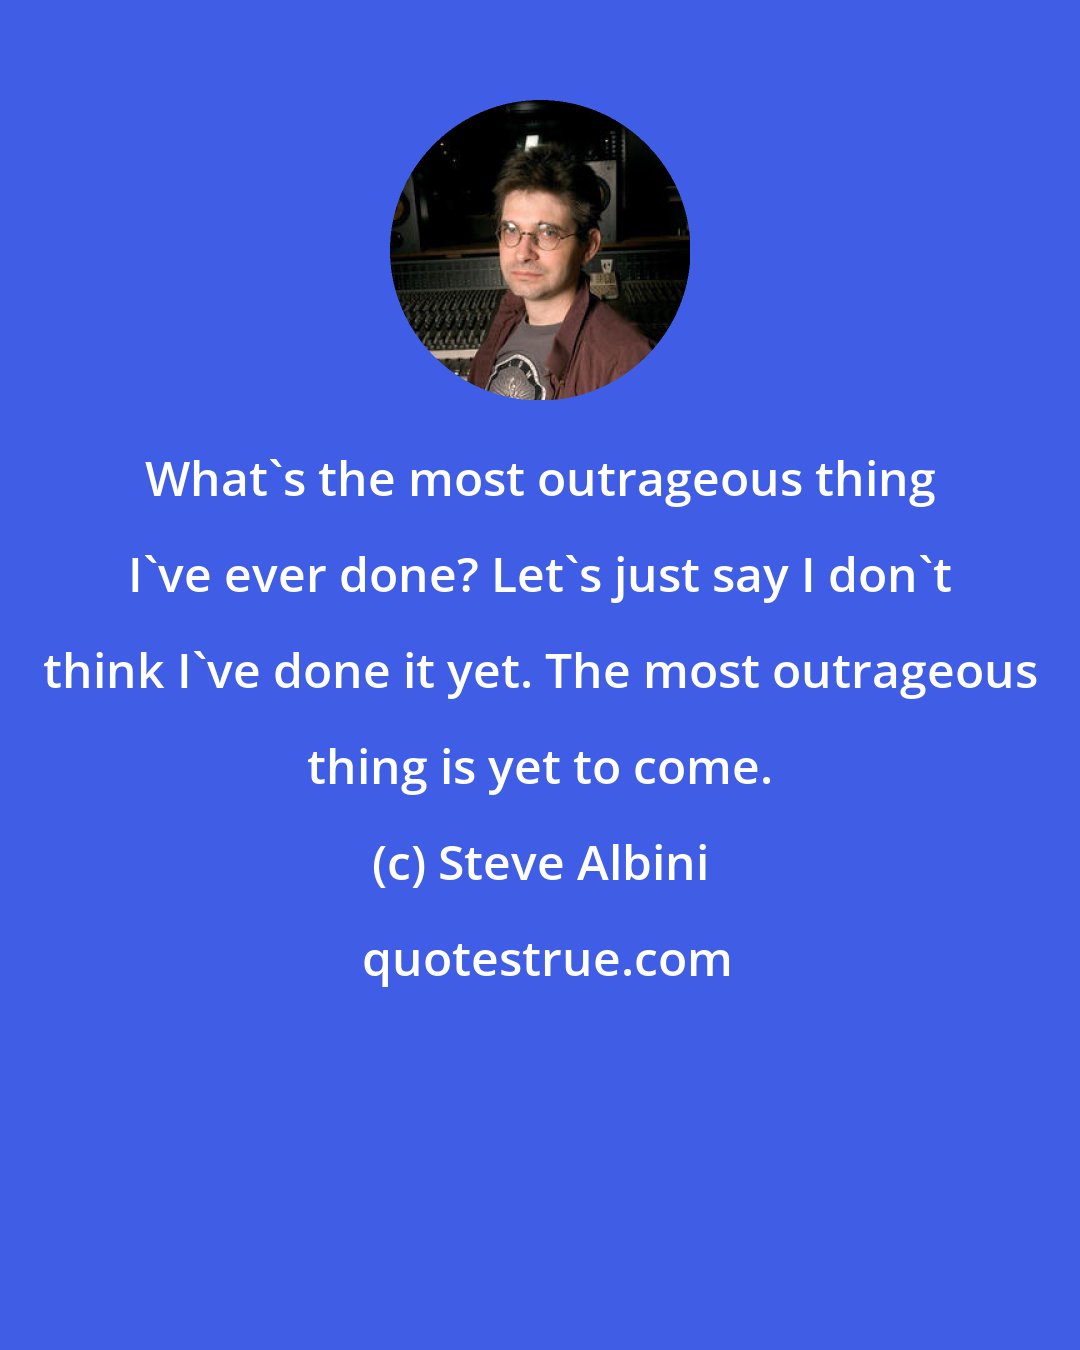 Steve Albini: What's the most outrageous thing I've ever done? Let's just say I don't think I've done it yet. The most outrageous thing is yet to come.